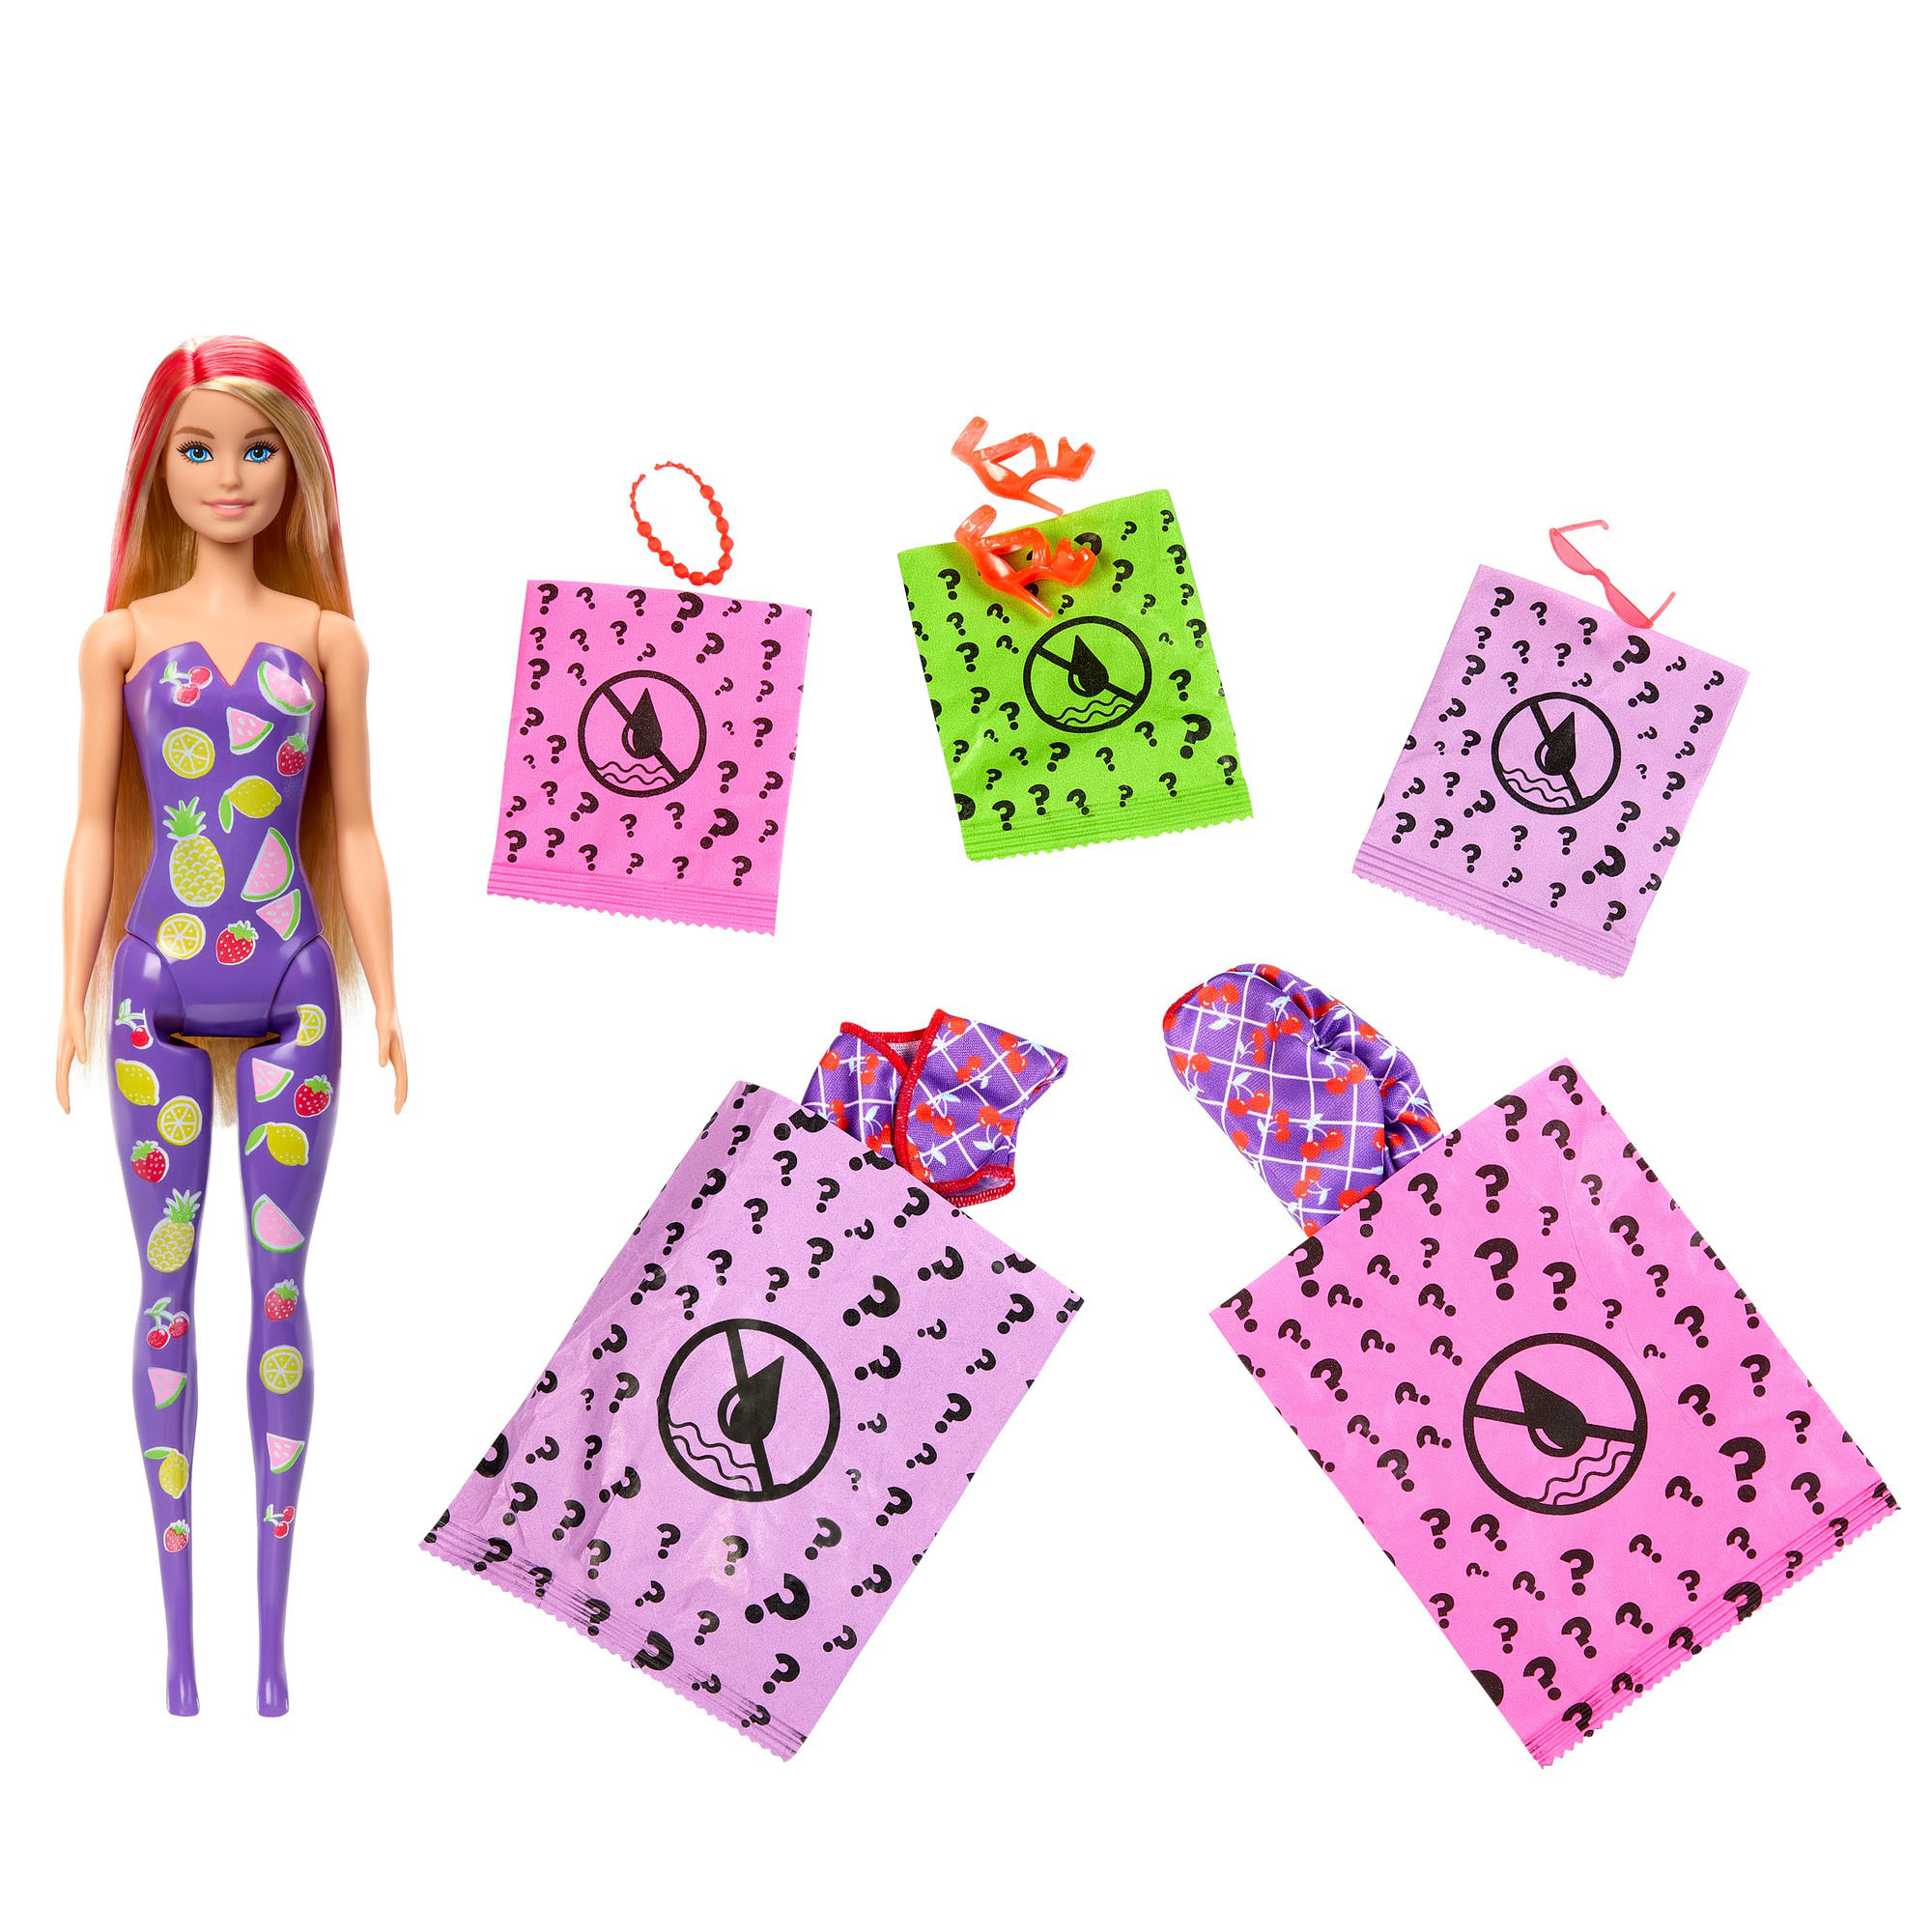 Barbie Color Reveal Mermaid Doll with 7 Unboxing Surprises With 7 surprises  in 1 package, the Barbie colour Reveal dolls deliver all…